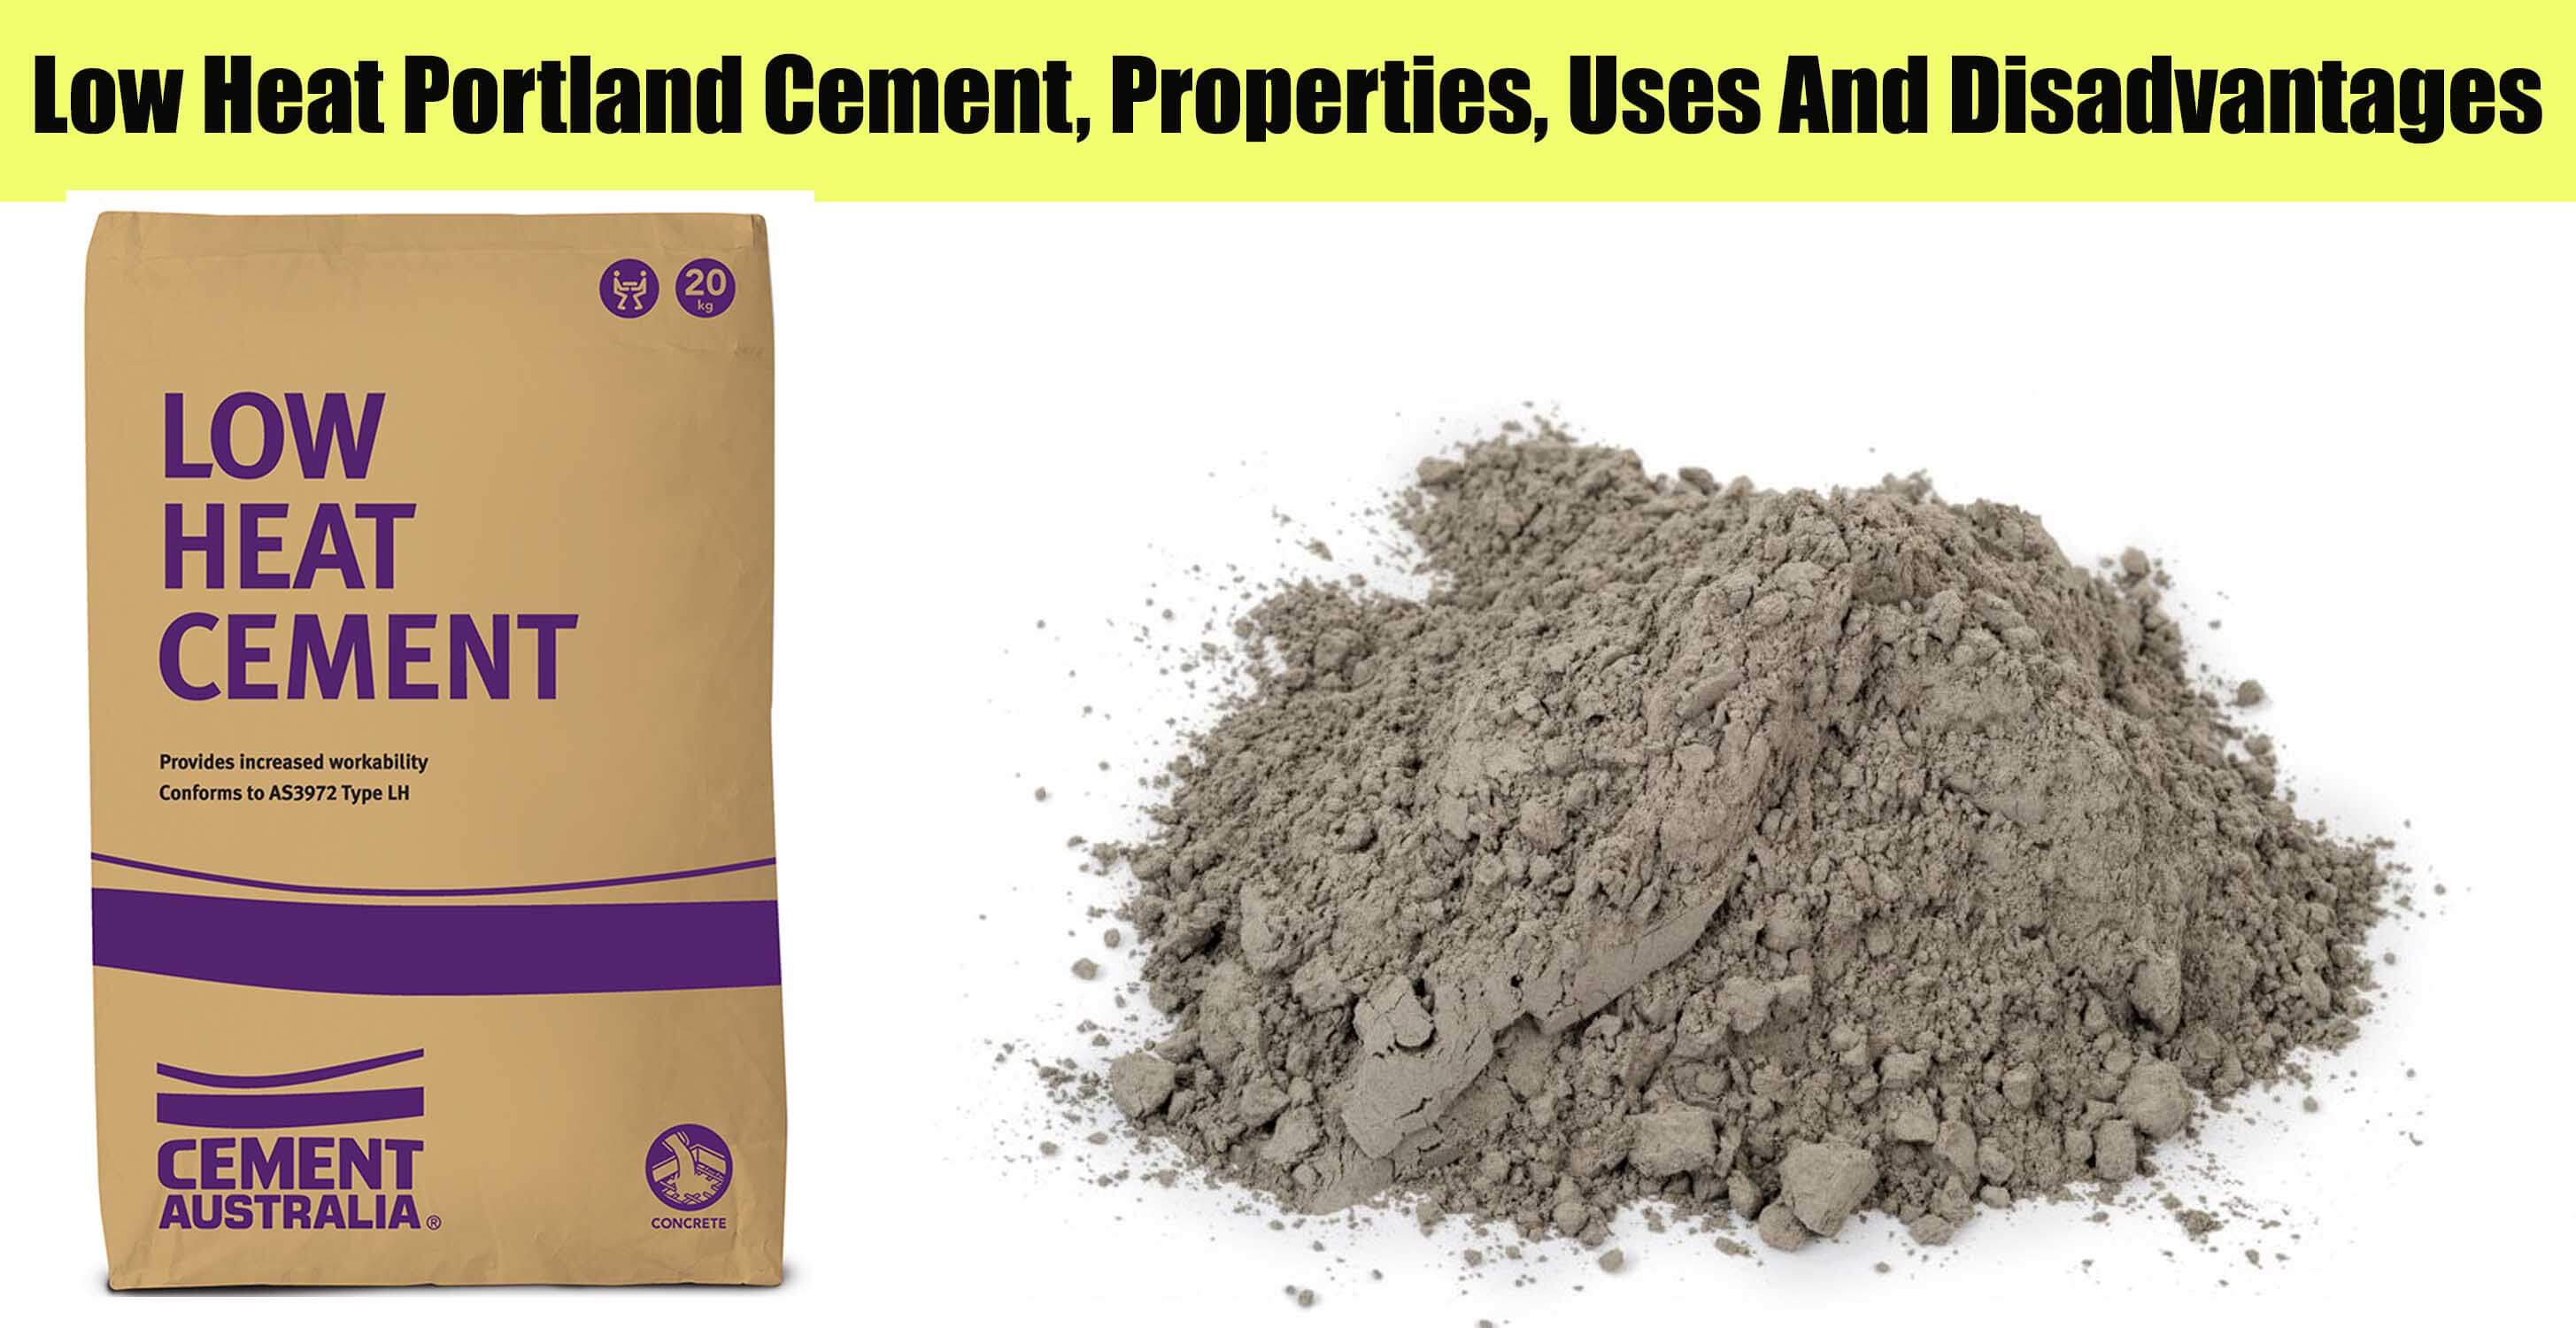 Low Heat Portland Cement, Properties, Uses And Disadvantages